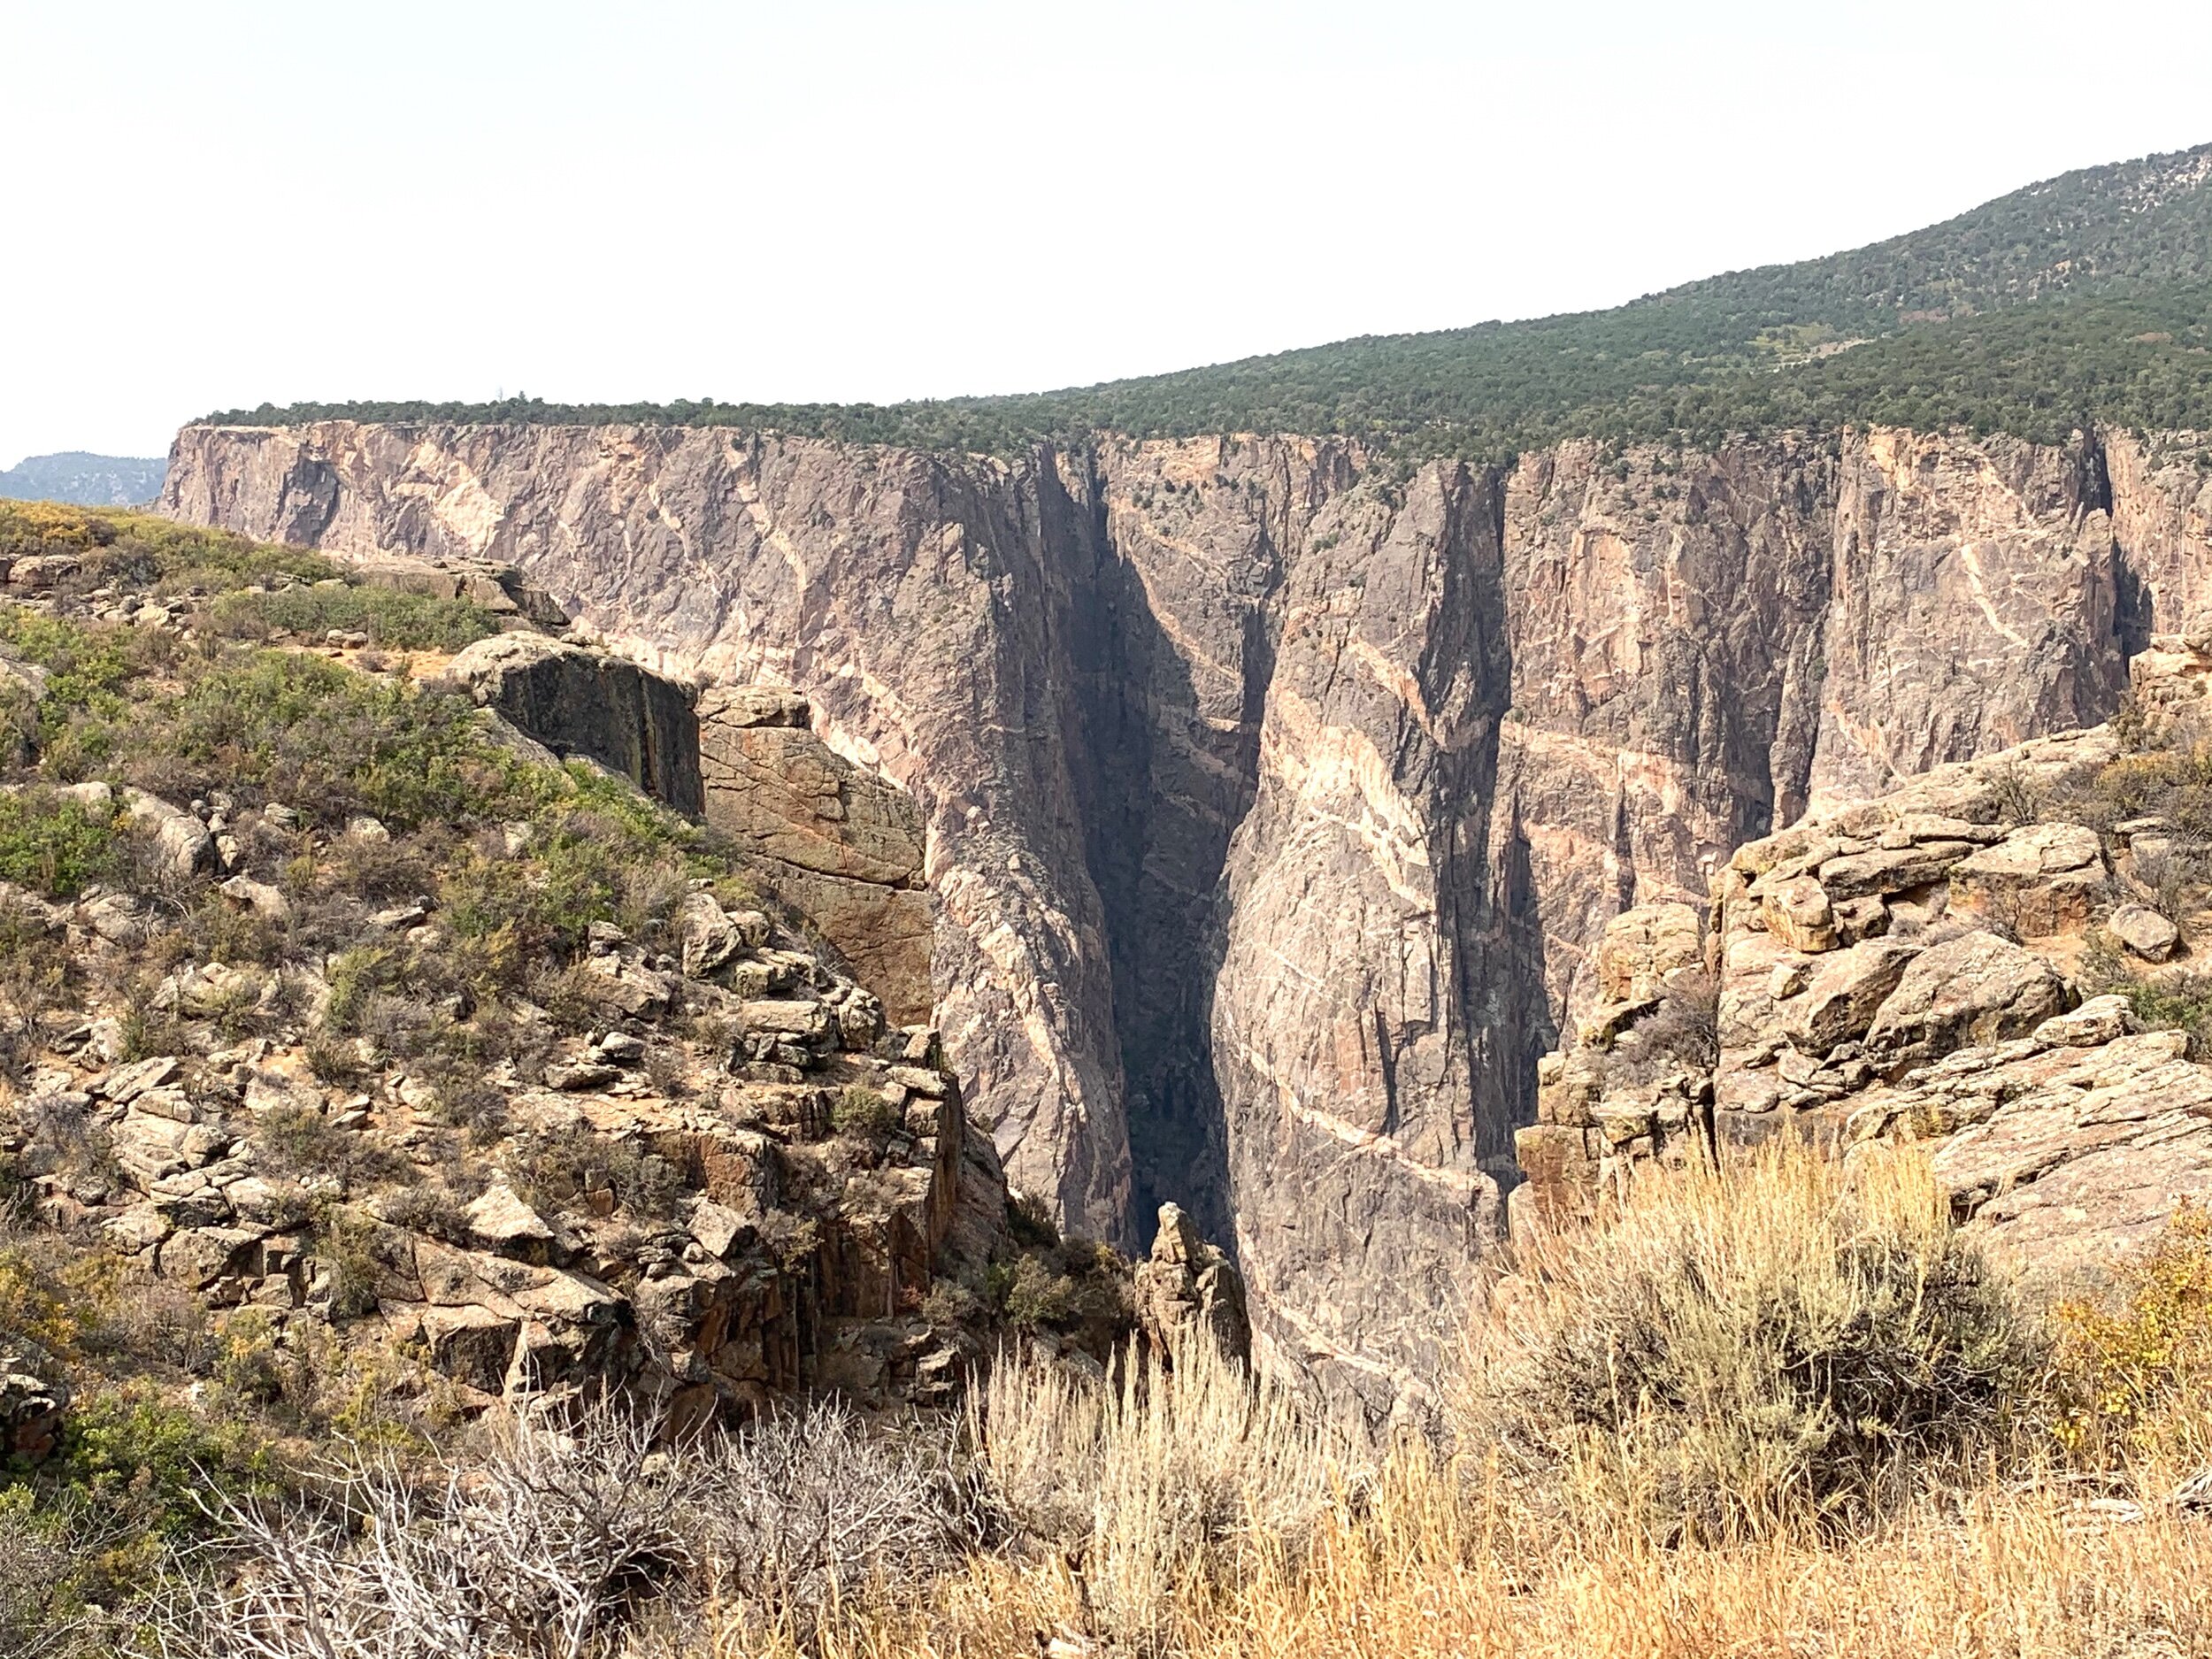  The canyons of the Gunnison River drops 240 feet per mile at its steepest point at  Chasm View —some of the steepest mountain descents in North America. 